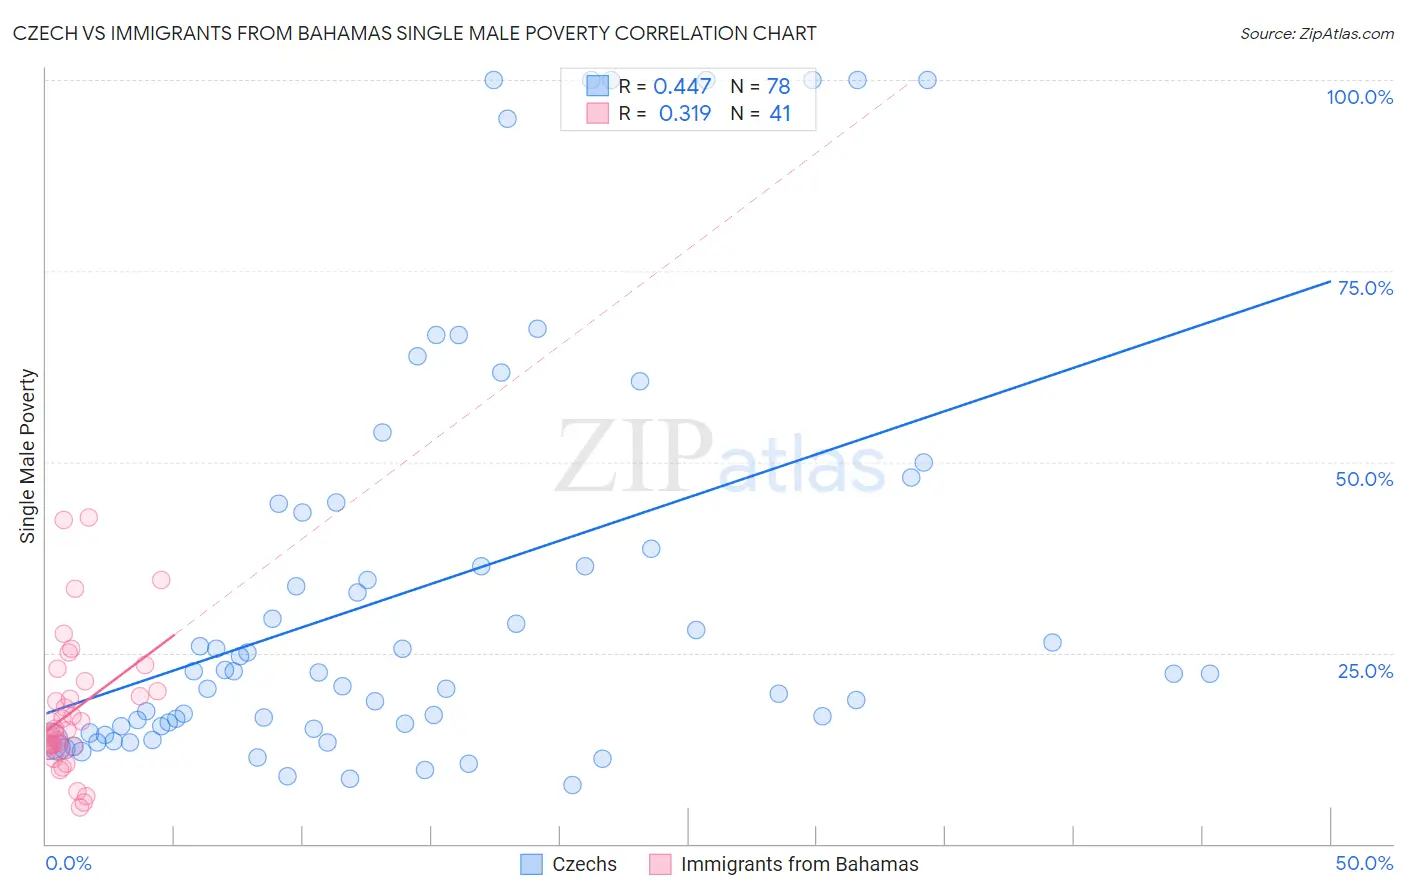 Czech vs Immigrants from Bahamas Single Male Poverty